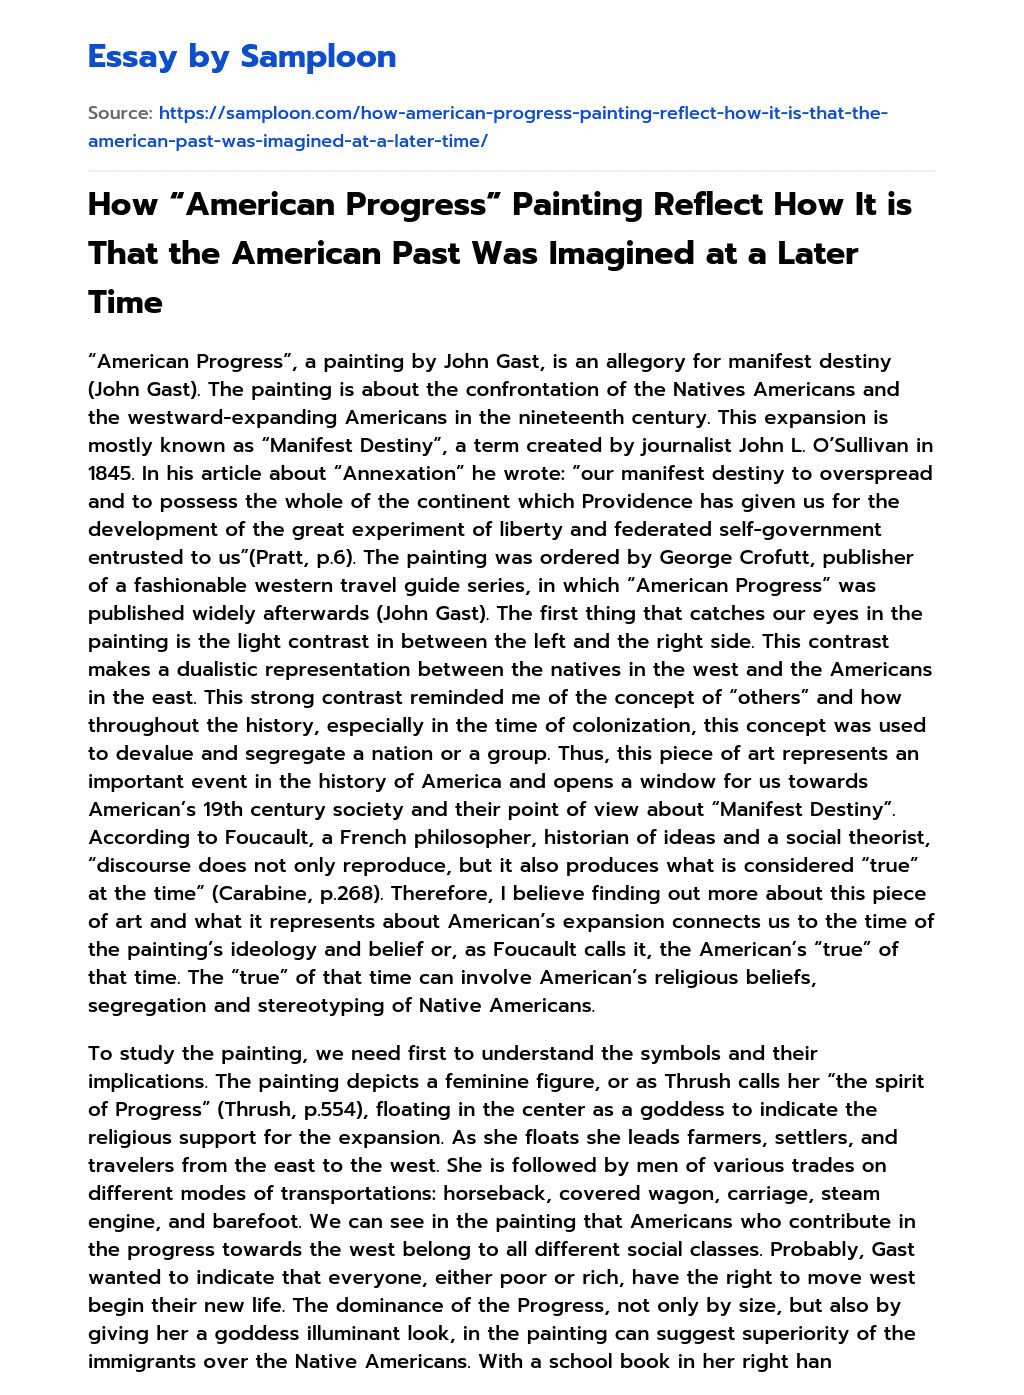 How “American Progress” Painting Reflect How It is That the American Past Was Imagined at a Later Time Analytical Essay essay